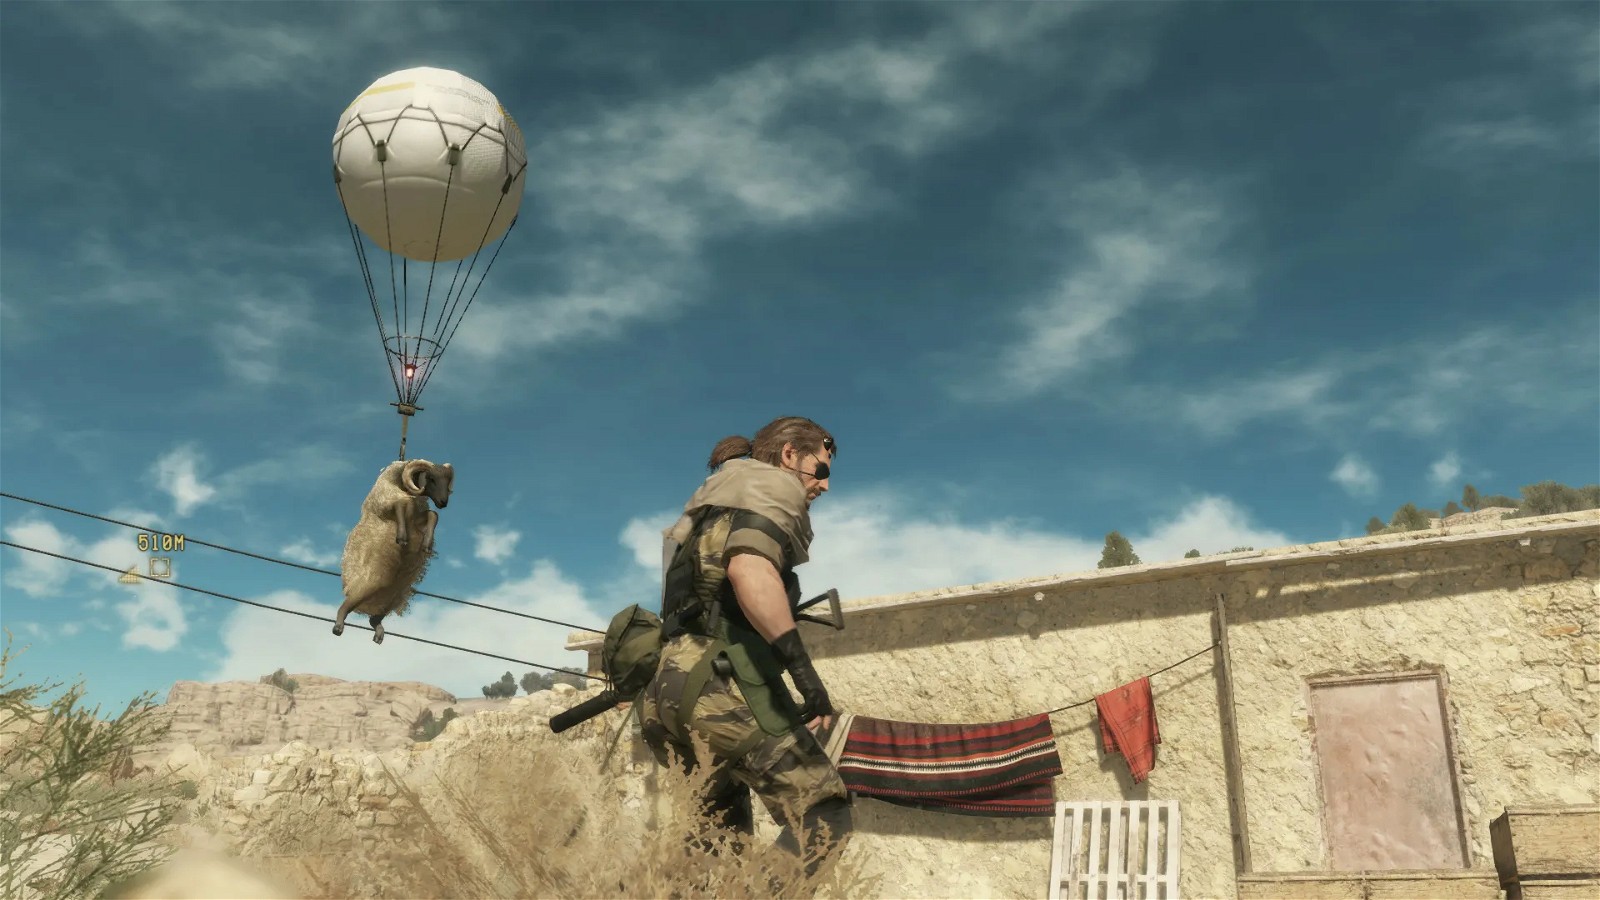 Metal Gear Solid 5's goofy Fulton balloon extraction system. Image credit: Konami